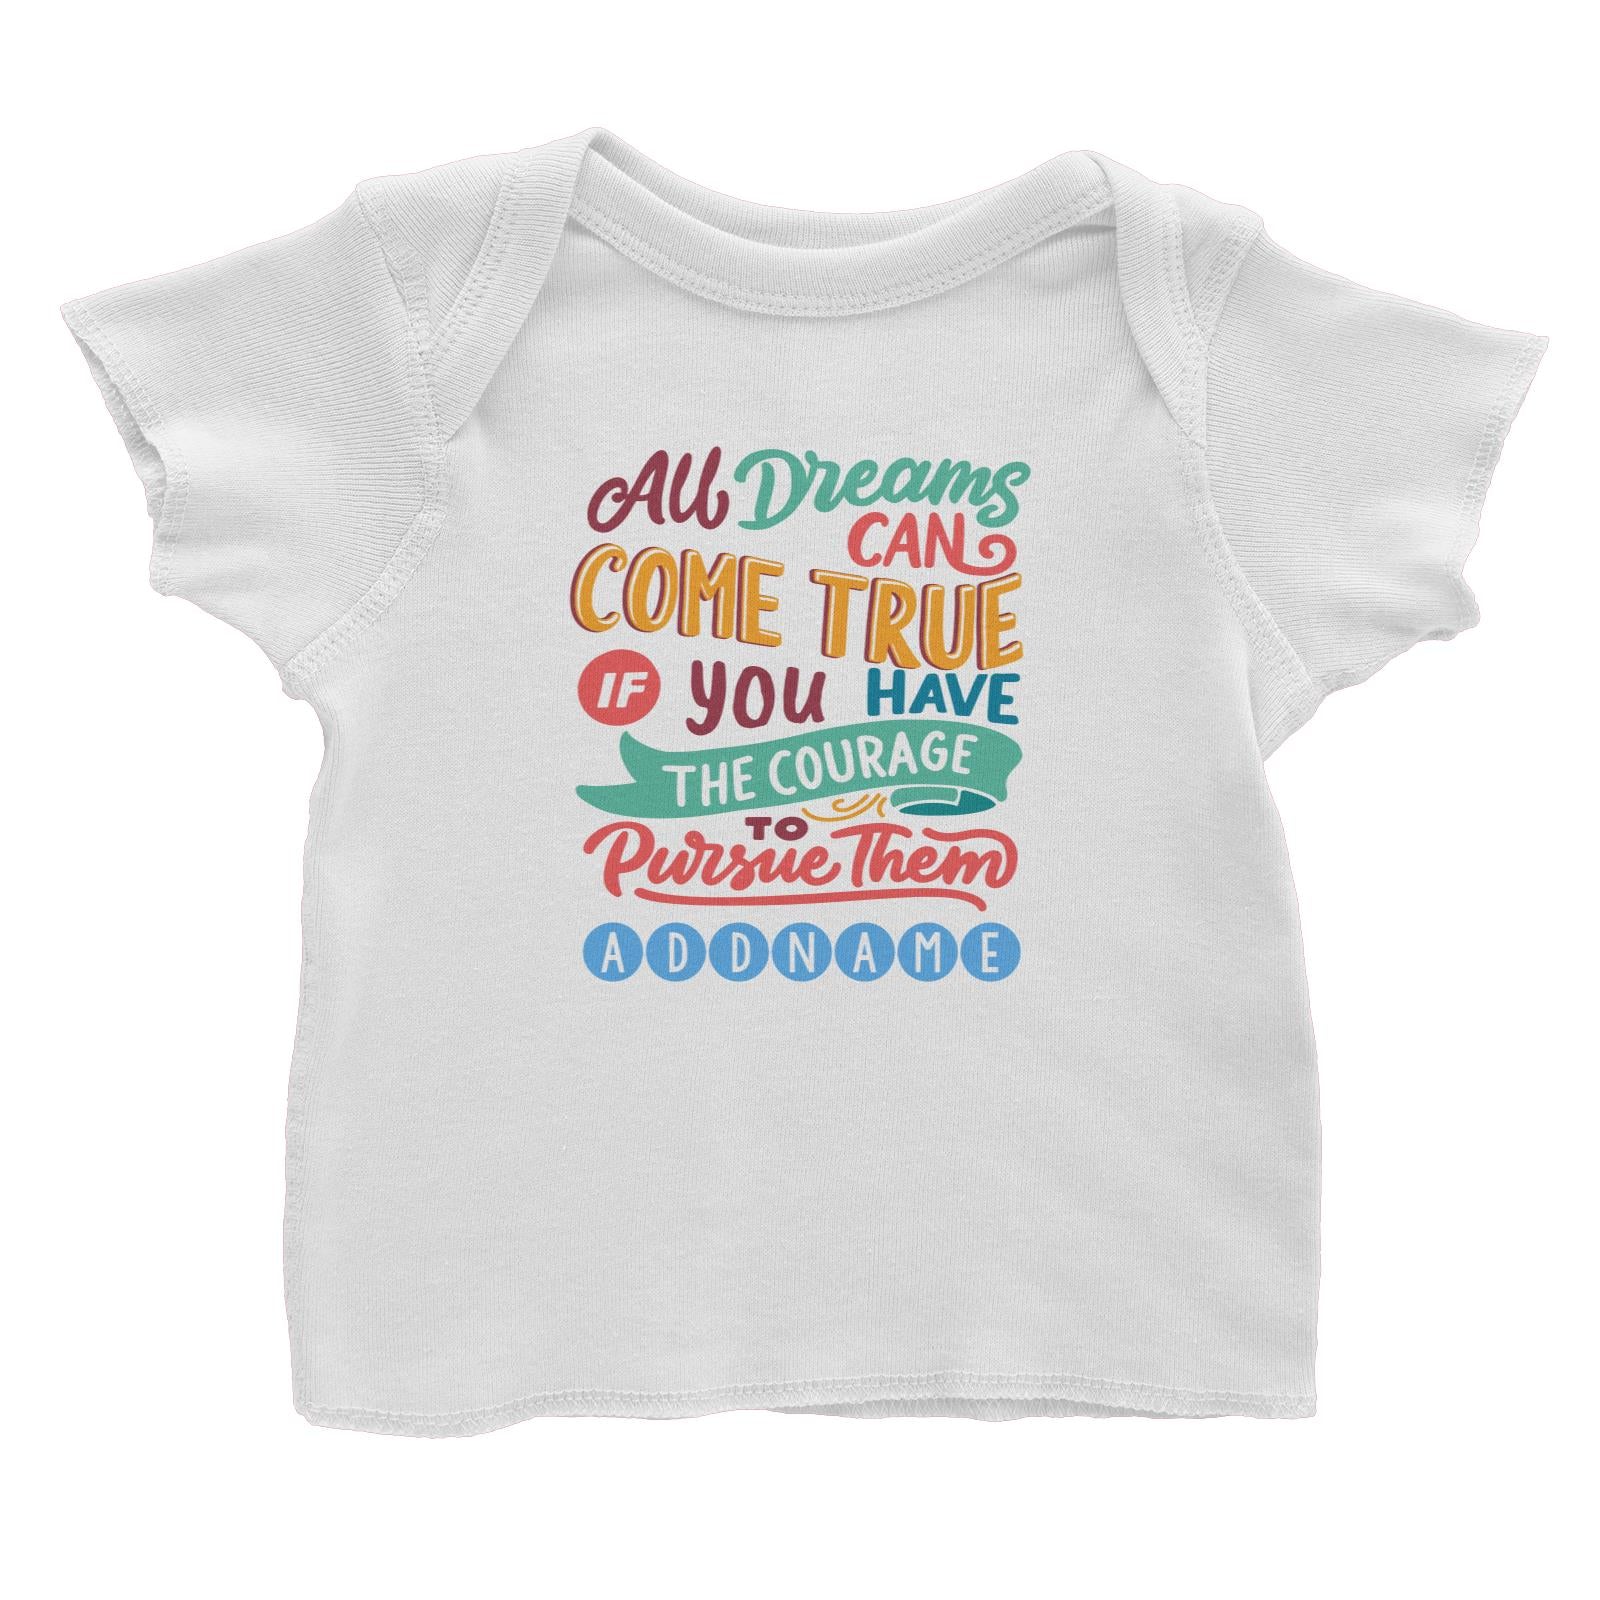 Children's Day Gift Series All Dreams Can Come True Addname Baby T-Shirt